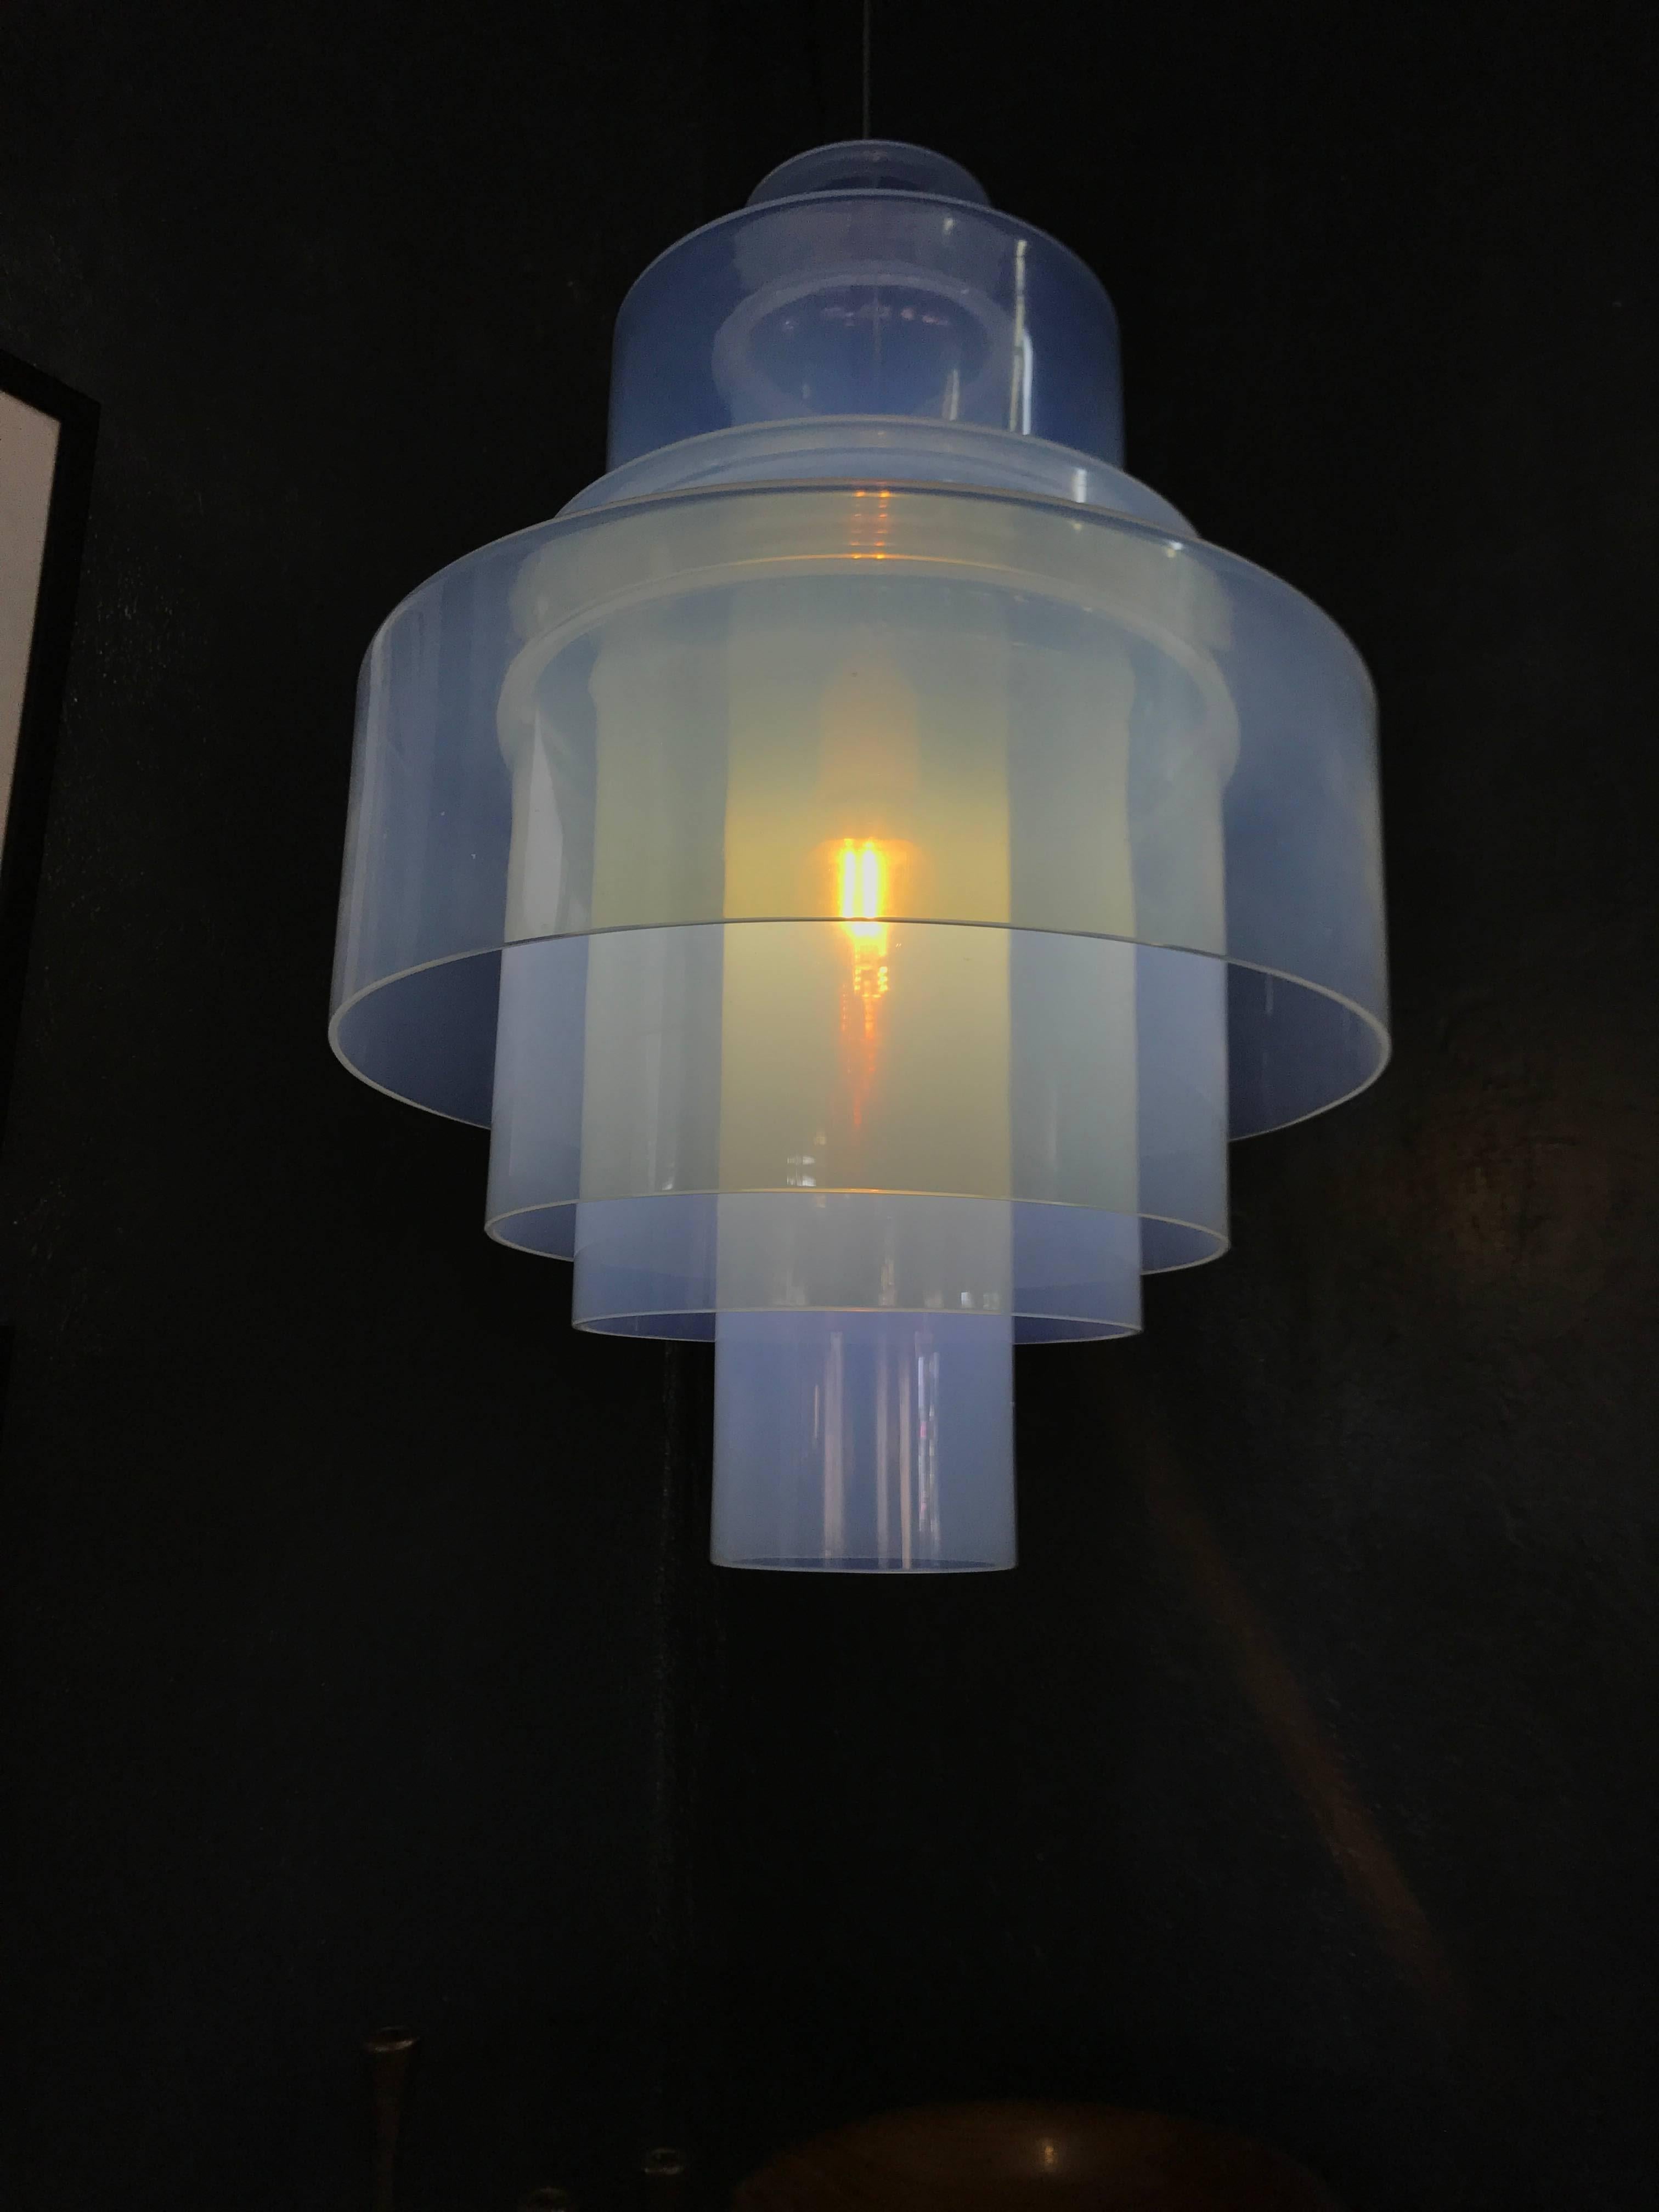 Beautiful and rare Mid-Century Modern pendan lamp by Mazzega, designed by Carlo Nason, circa 1960, Murano, Italy.
The lamp alone measures 21 inches tall and has a 15 inch diameter
Consists of four separate pieces stacked together.
The glass has